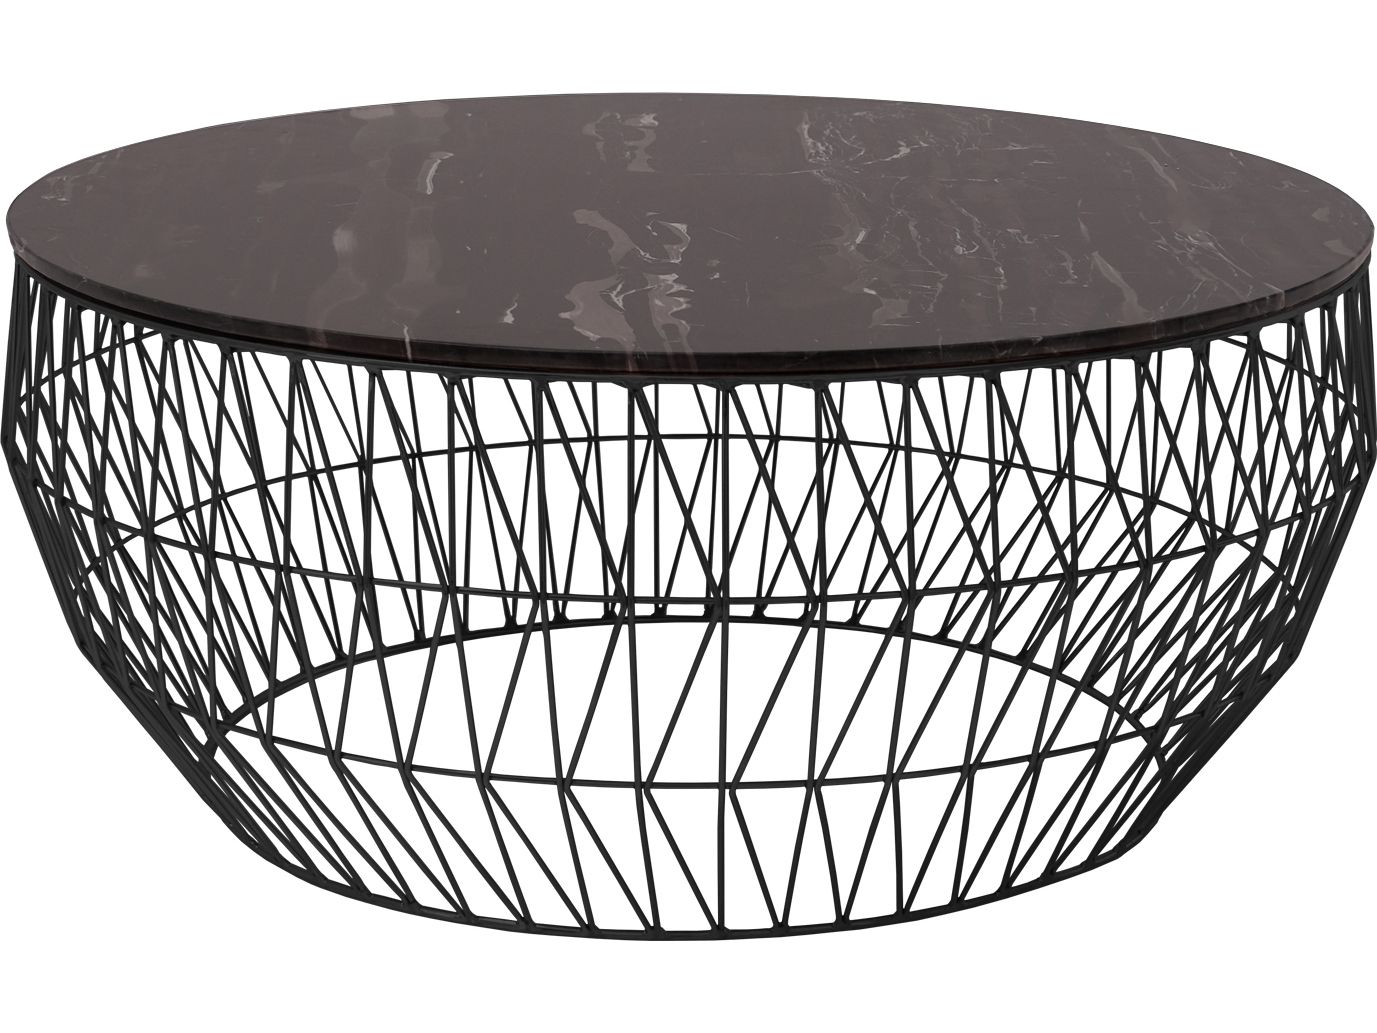 Black Outdoor Coffee Table Uk : Portside Outdoor Round Concrete Coffee Pertaining To Outdoor Half Round Coffee Tables (View 10 of 20)